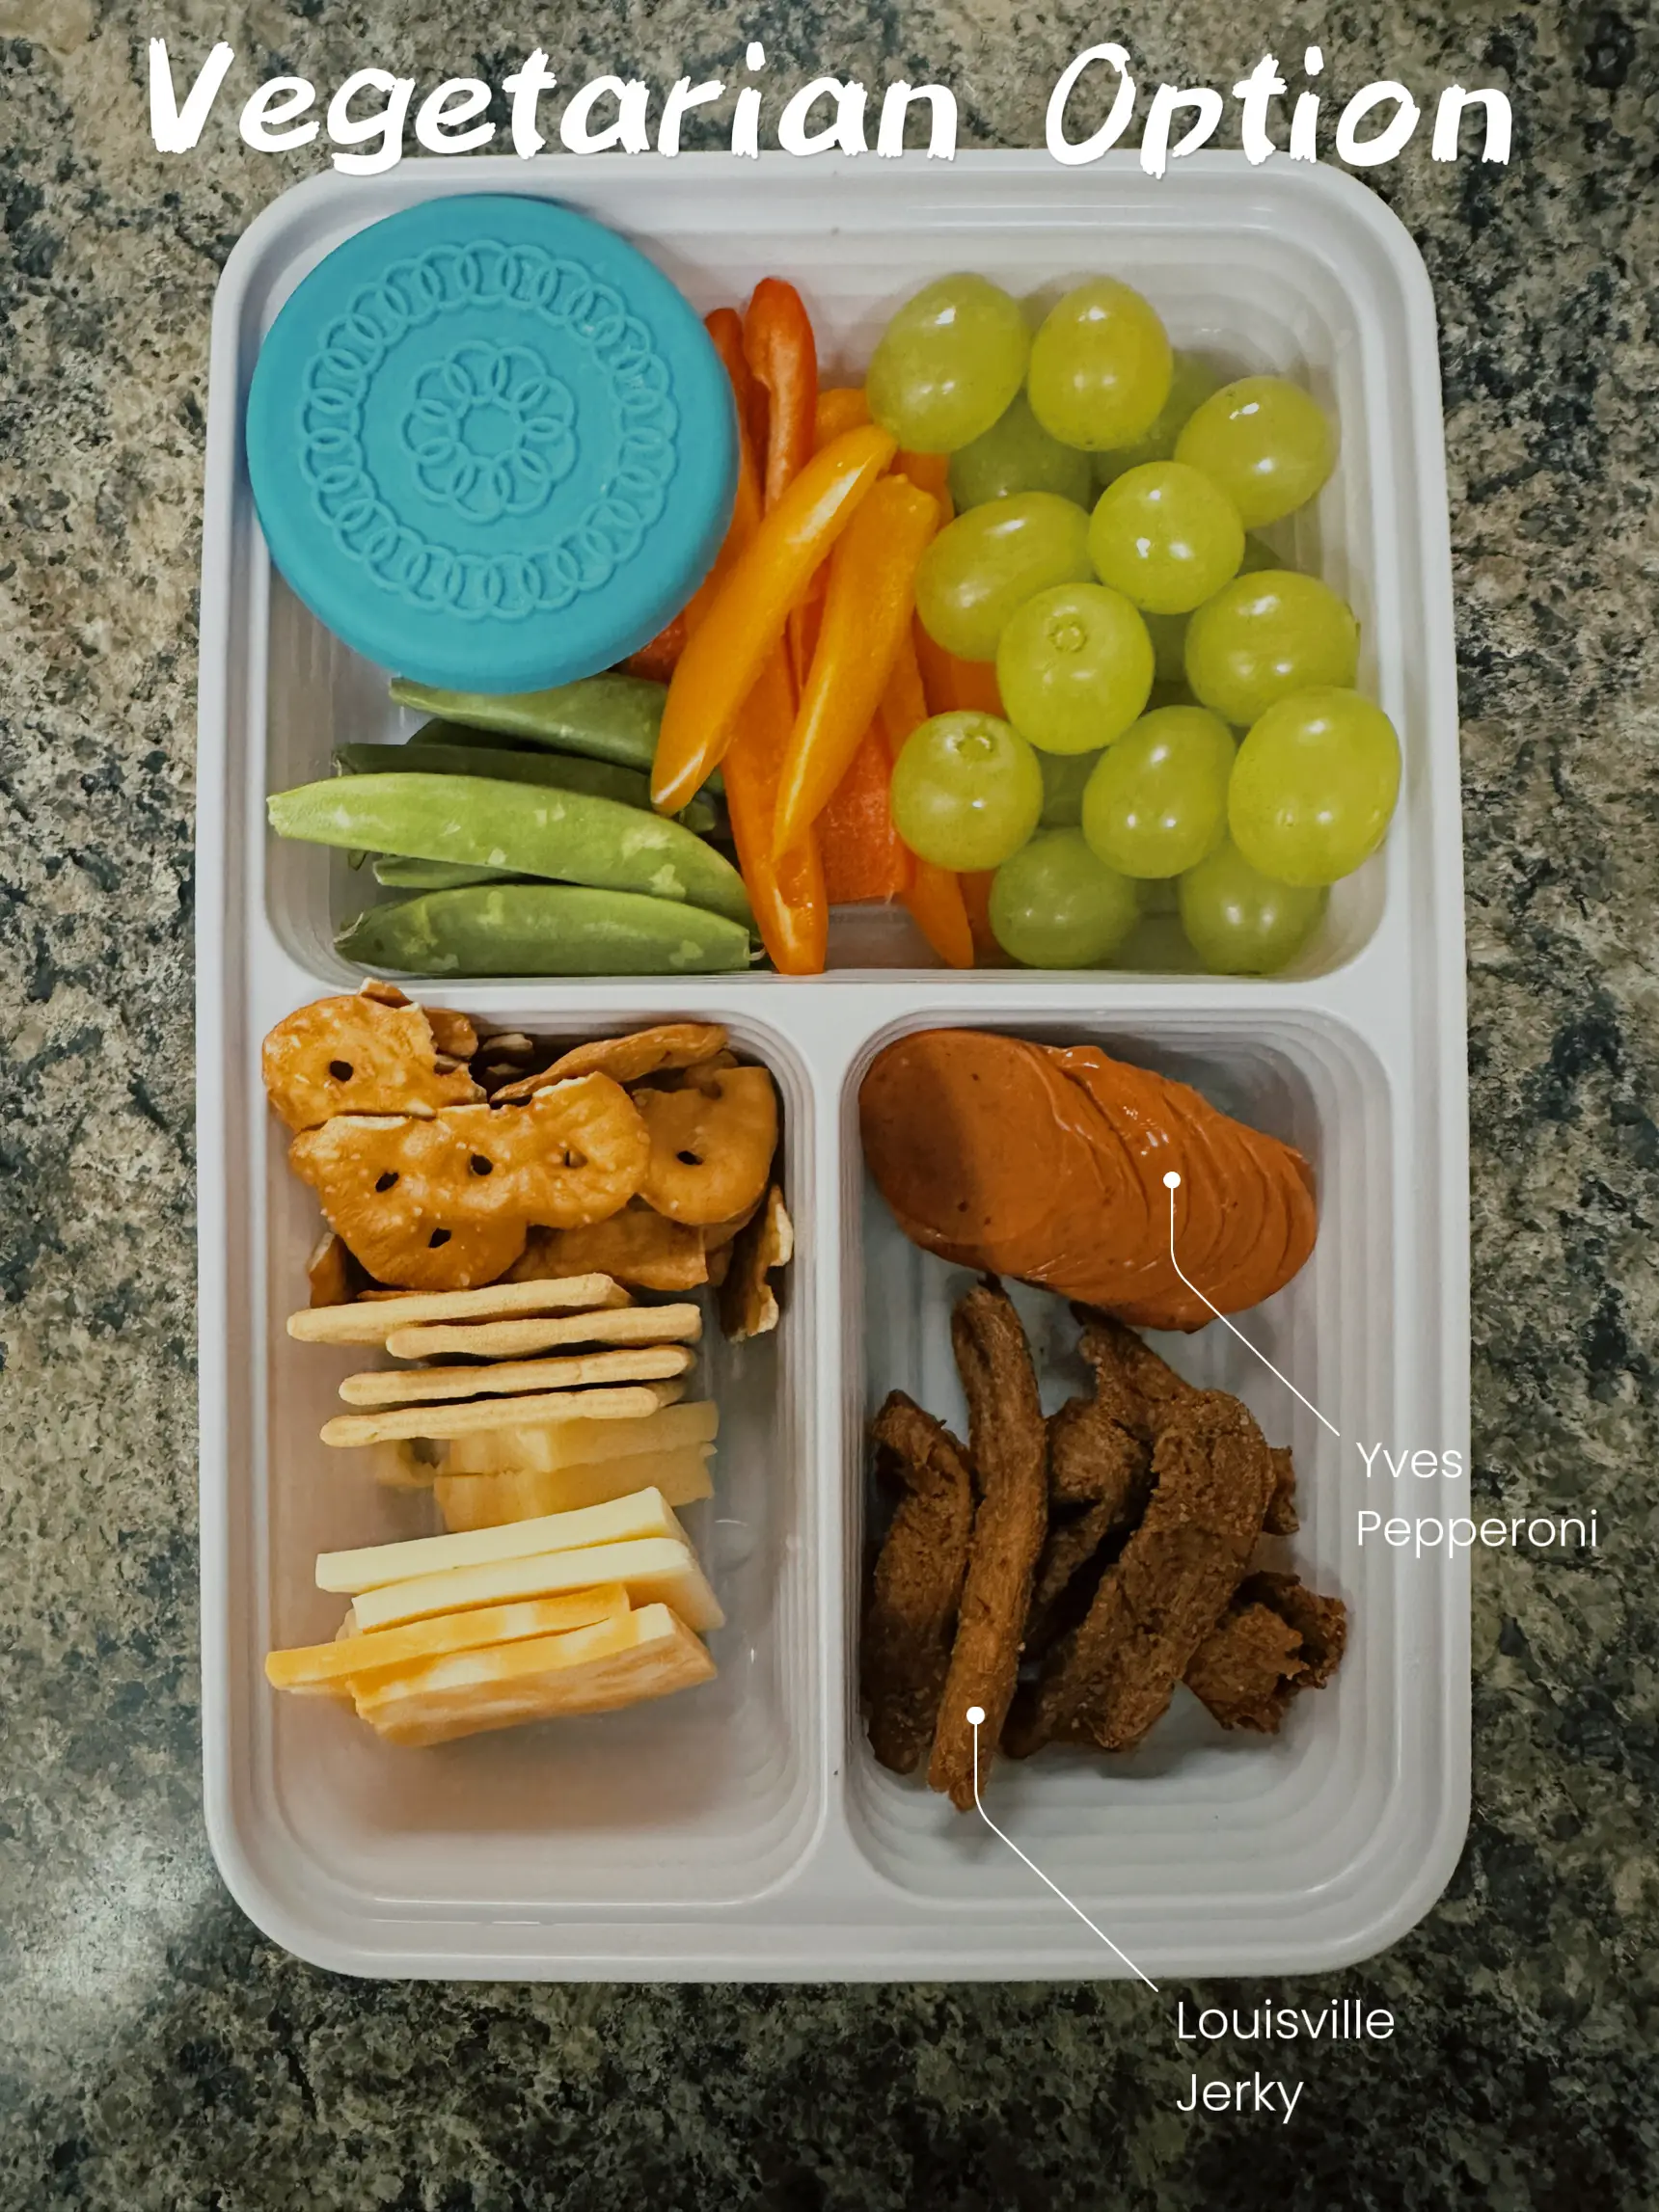 Easy and Nutritious Adult Lunchables — Lemond Nutrition